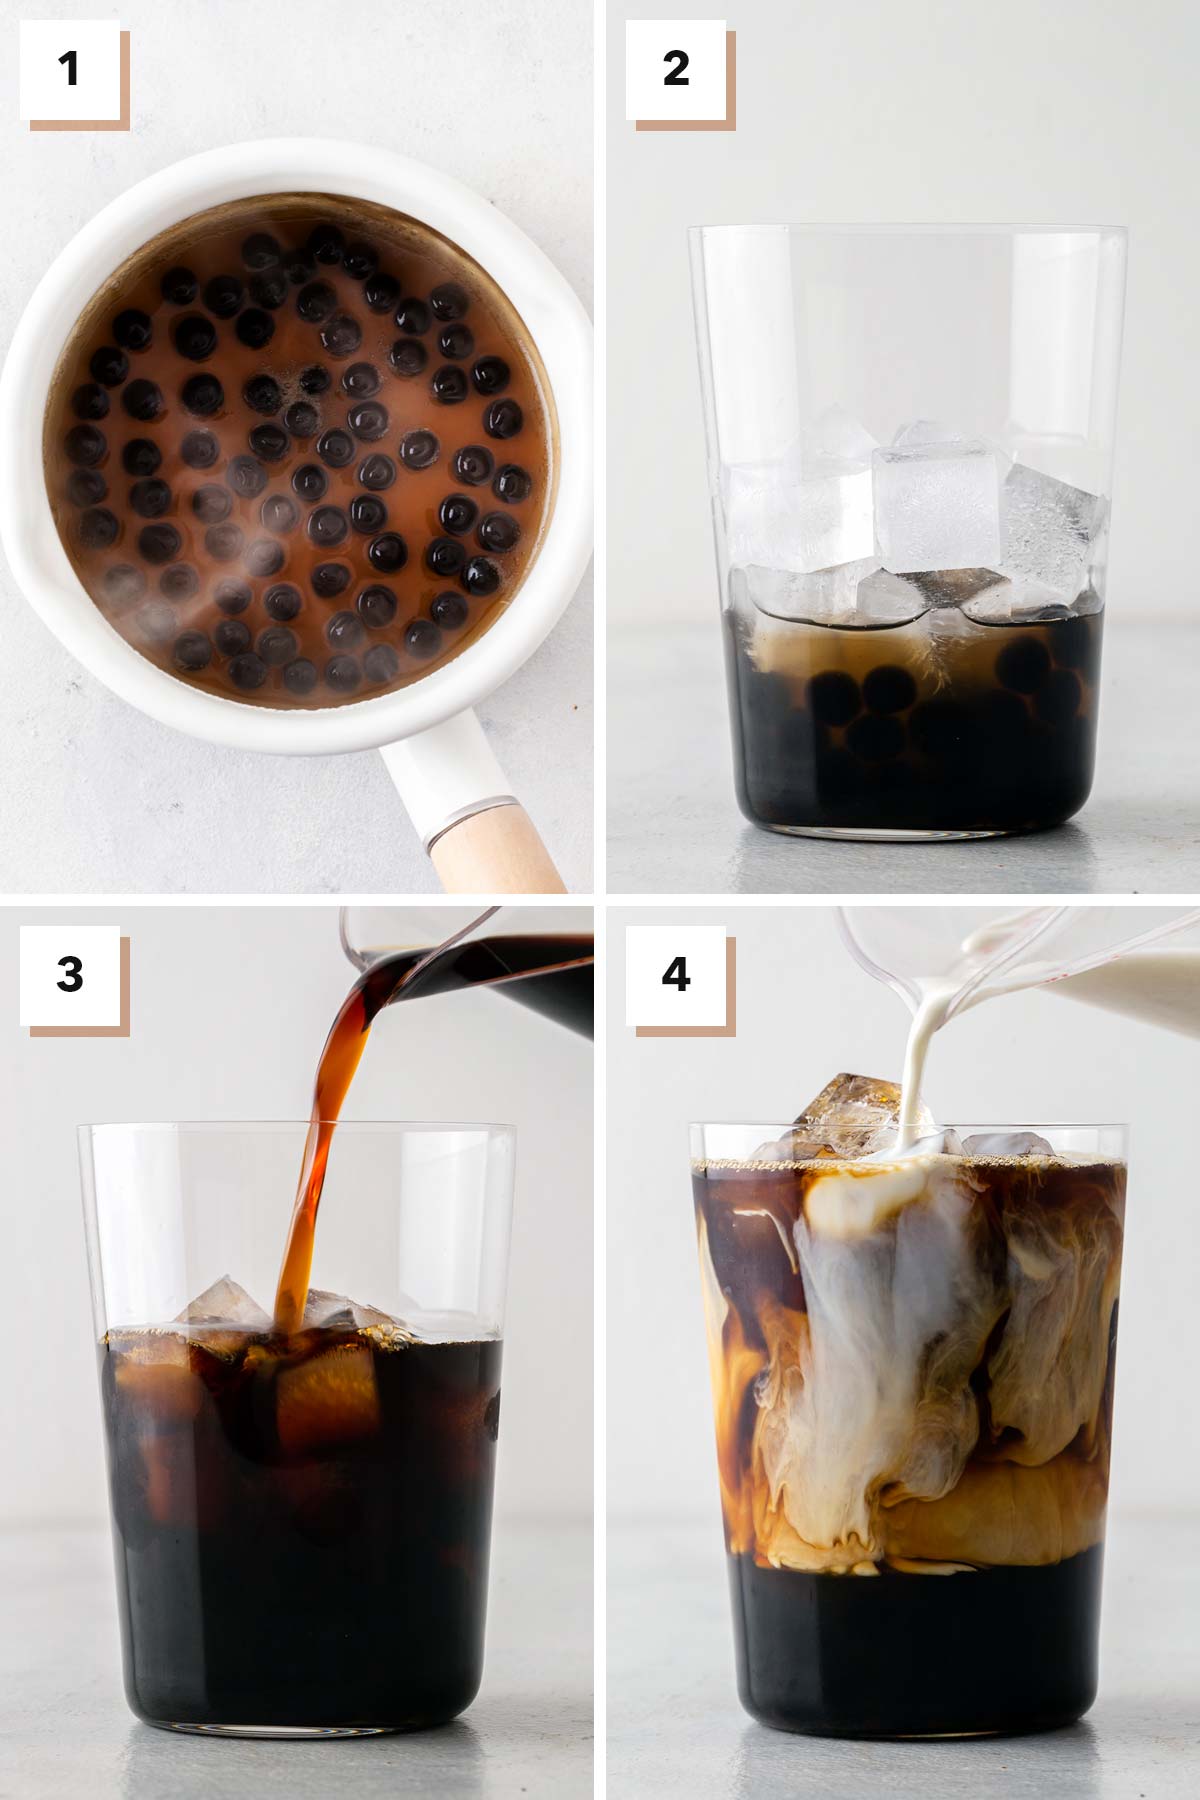 Iced Coffee Boba step-by-step instructions for how to prepare and assemble the drink.